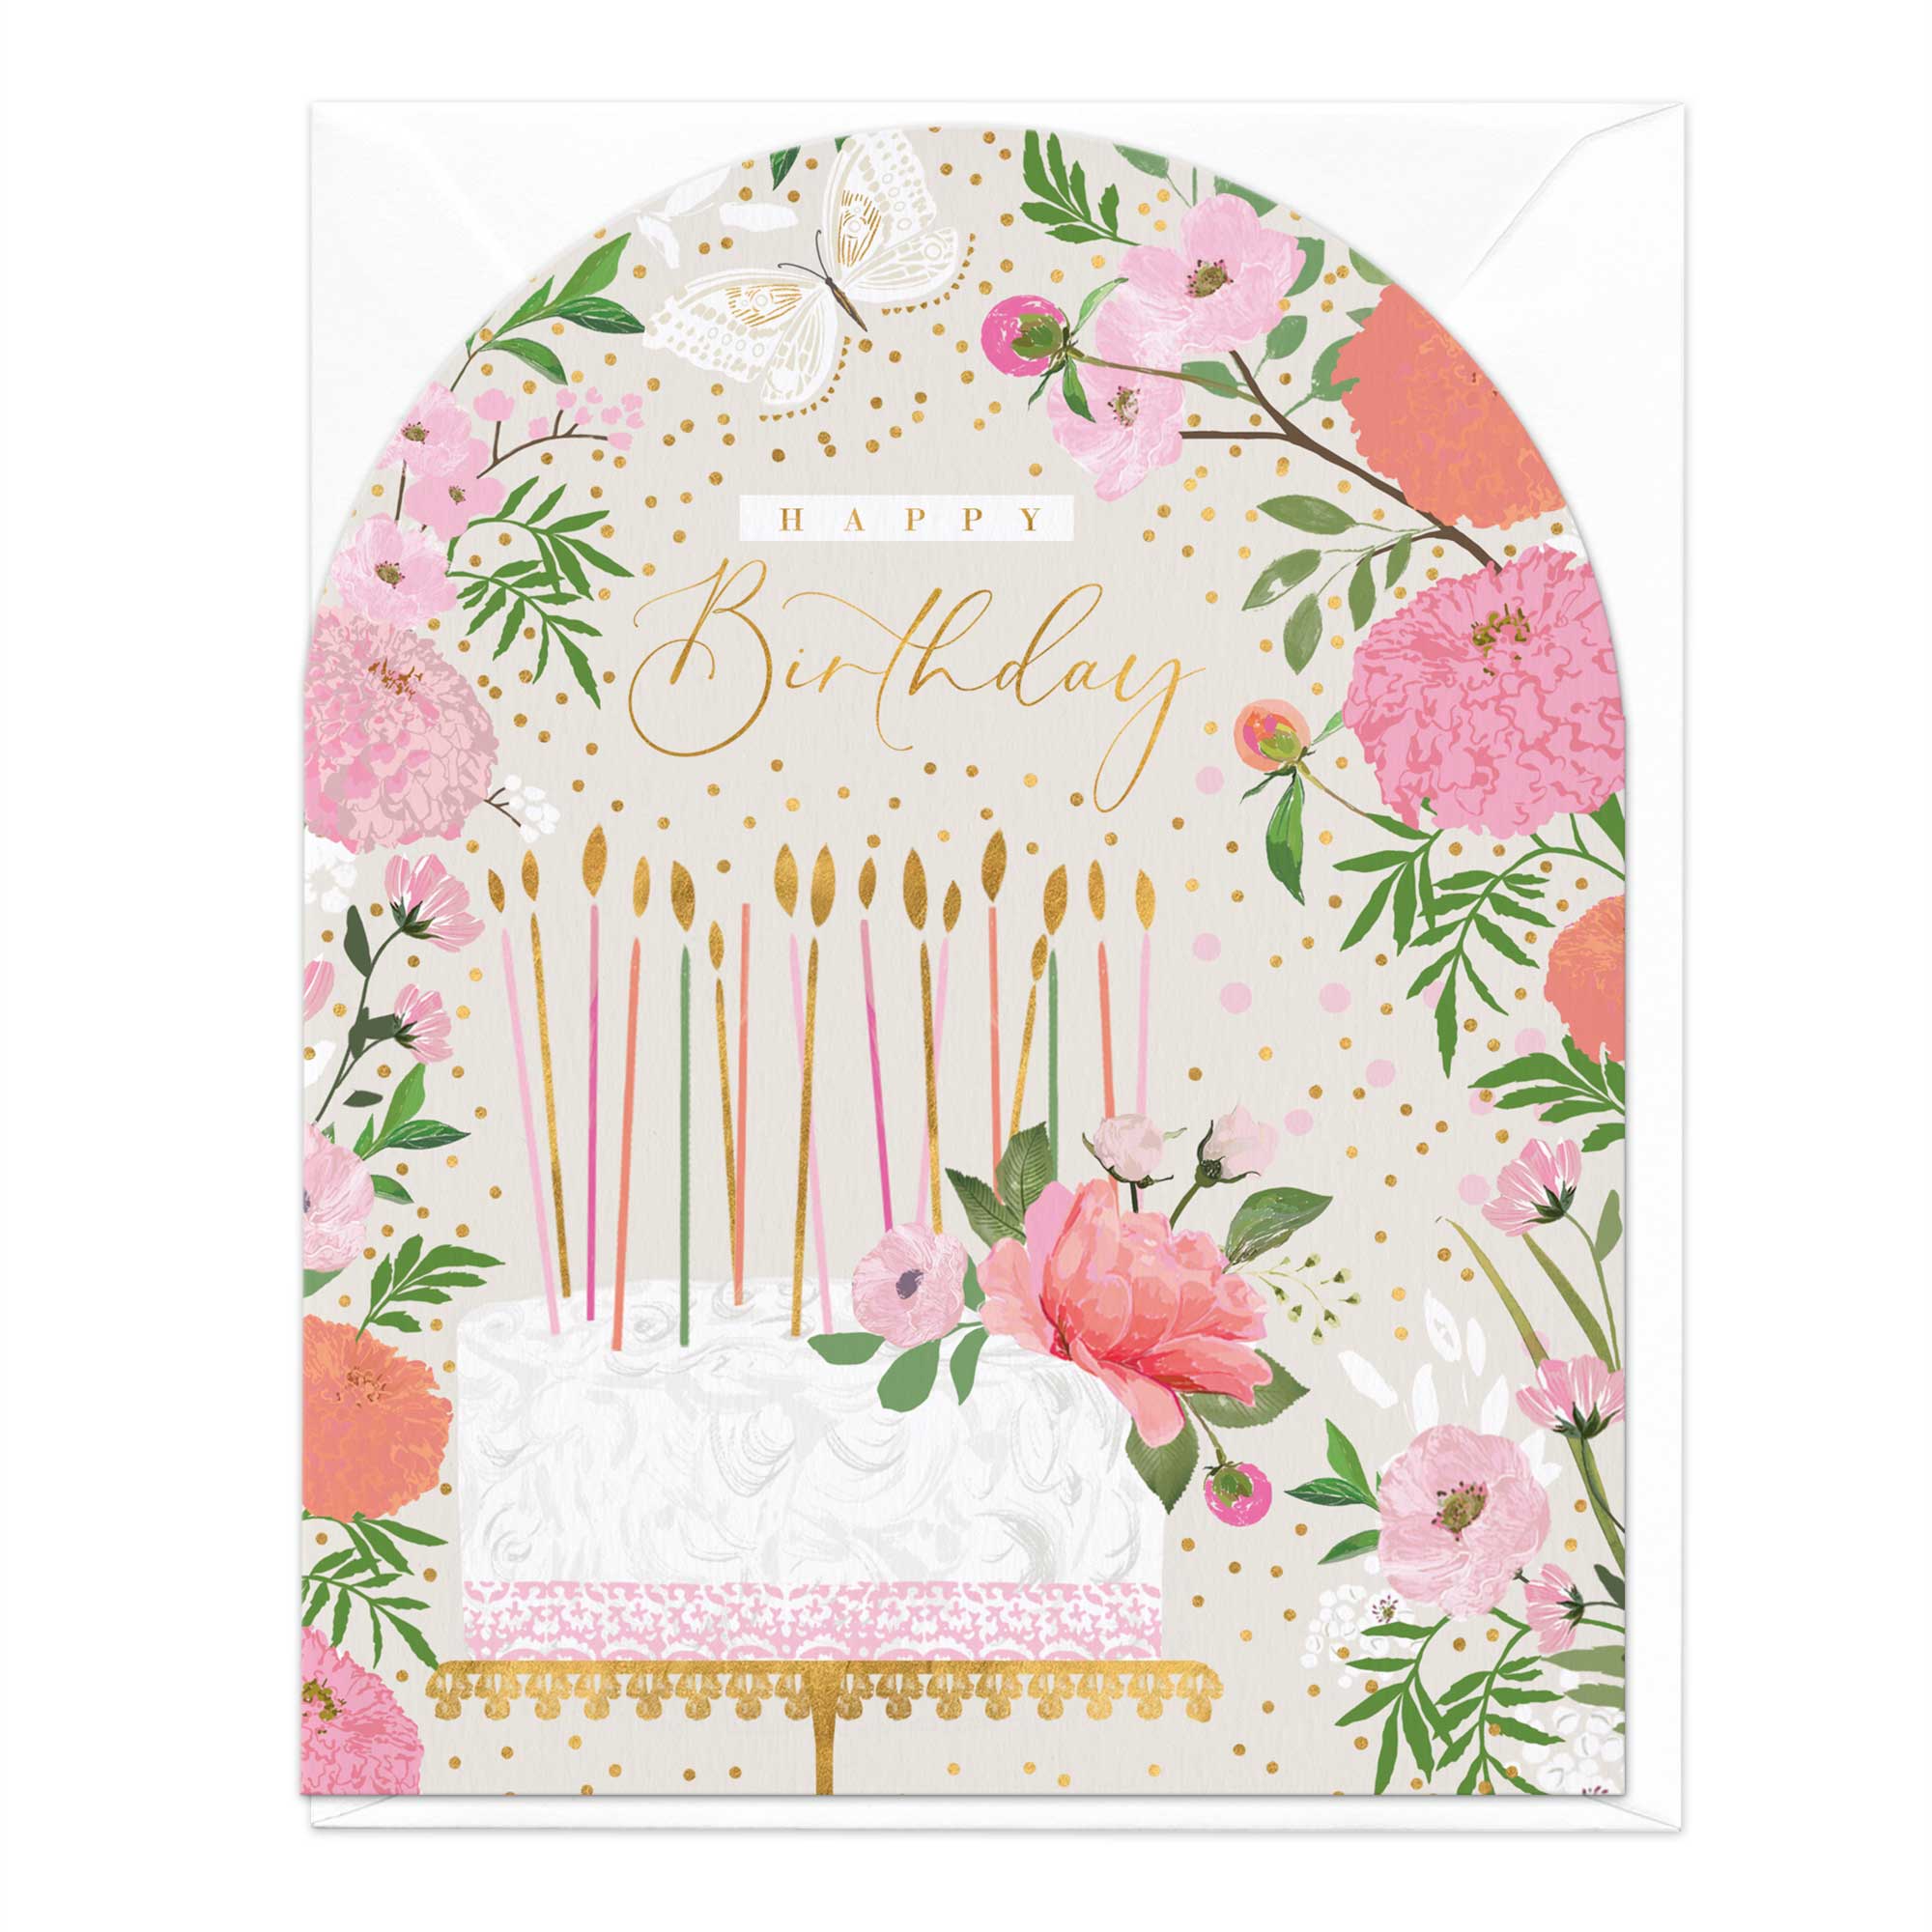 Cake And Flowers Birthday Card